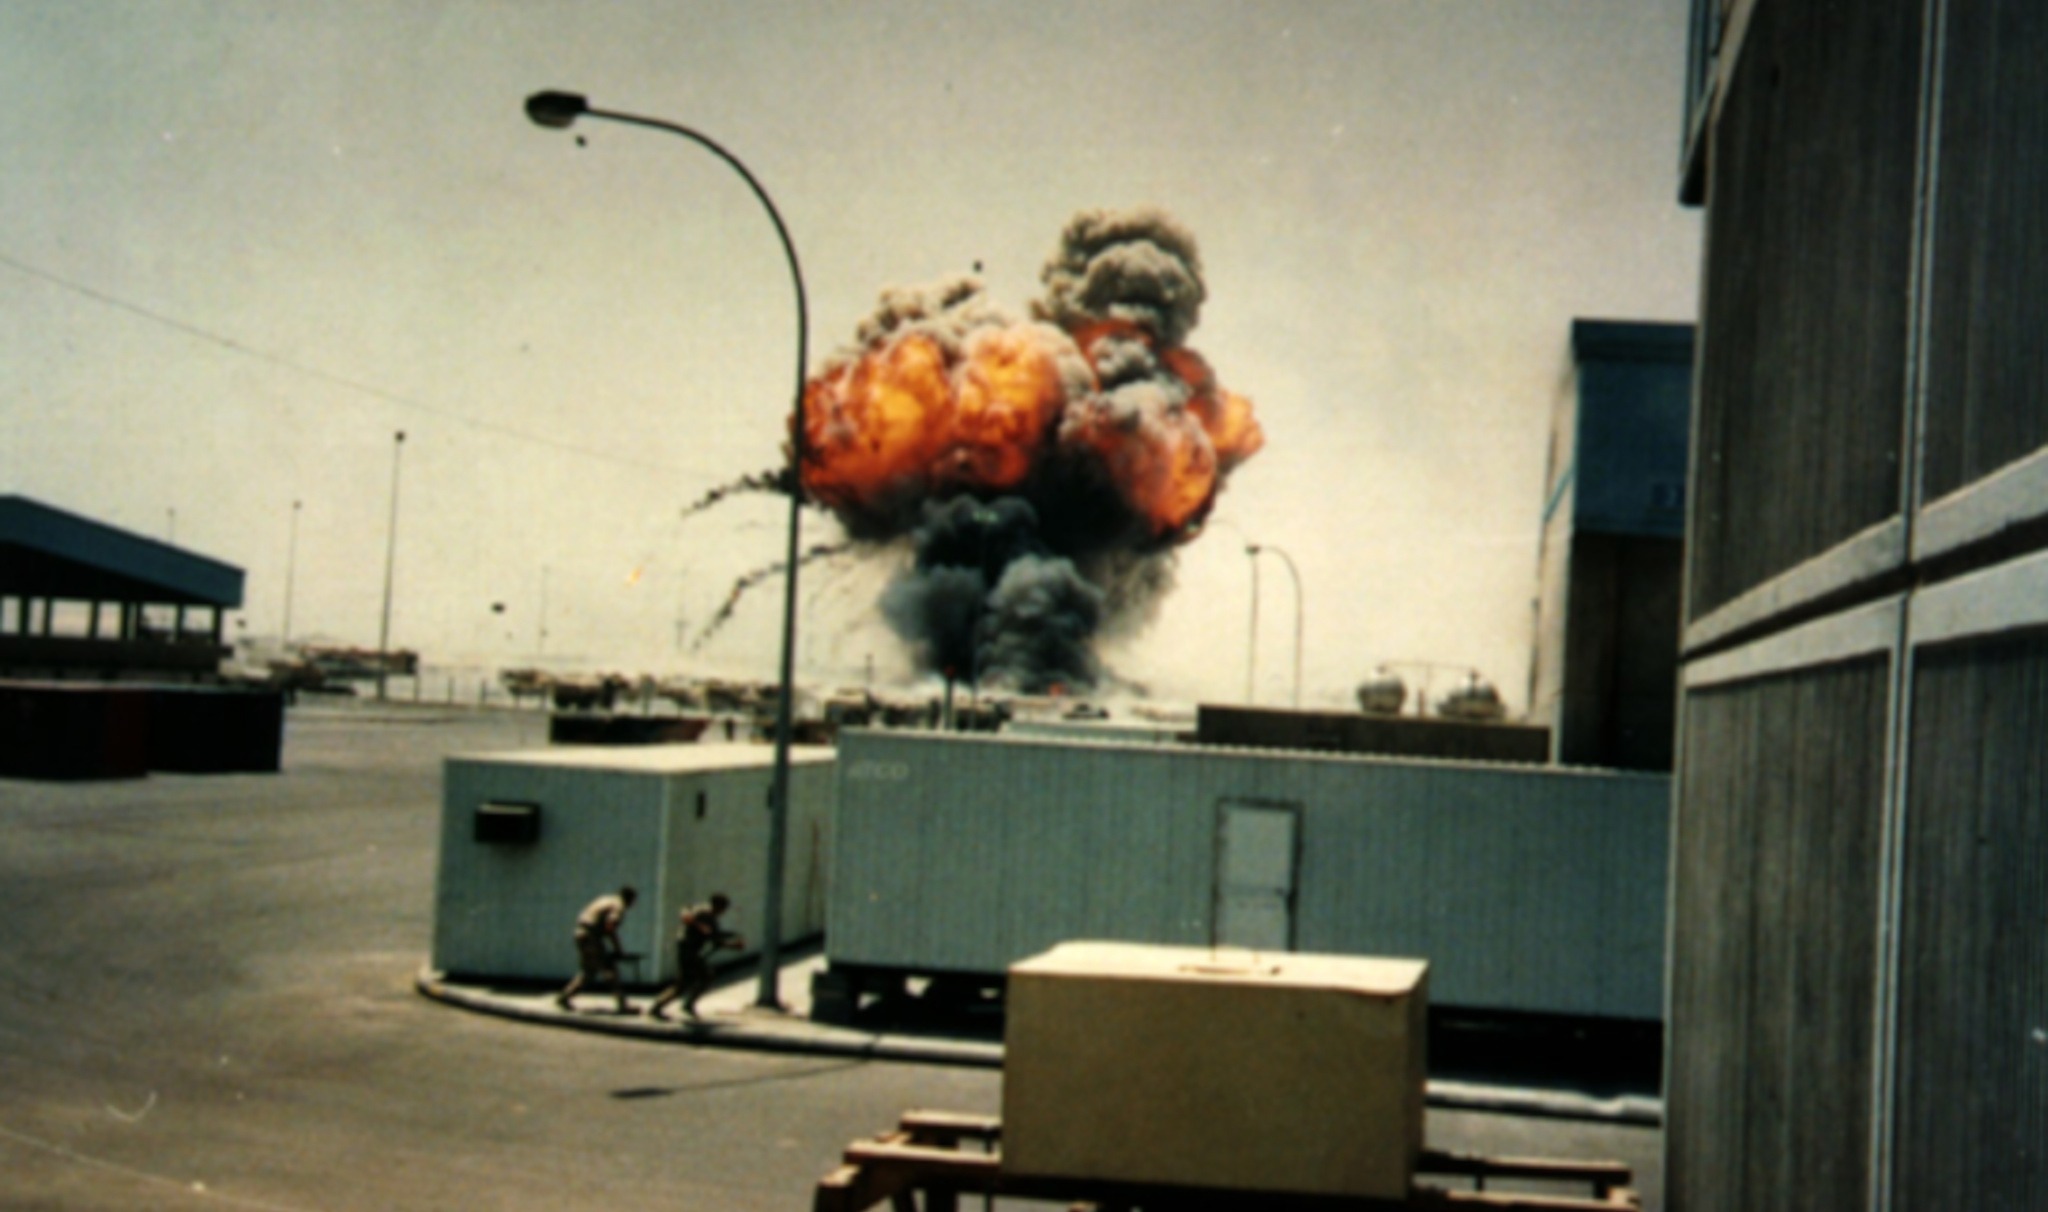 US troops run from a fire which damaged depleted uranium stockpiles in Kuwait. (Photo: US army)